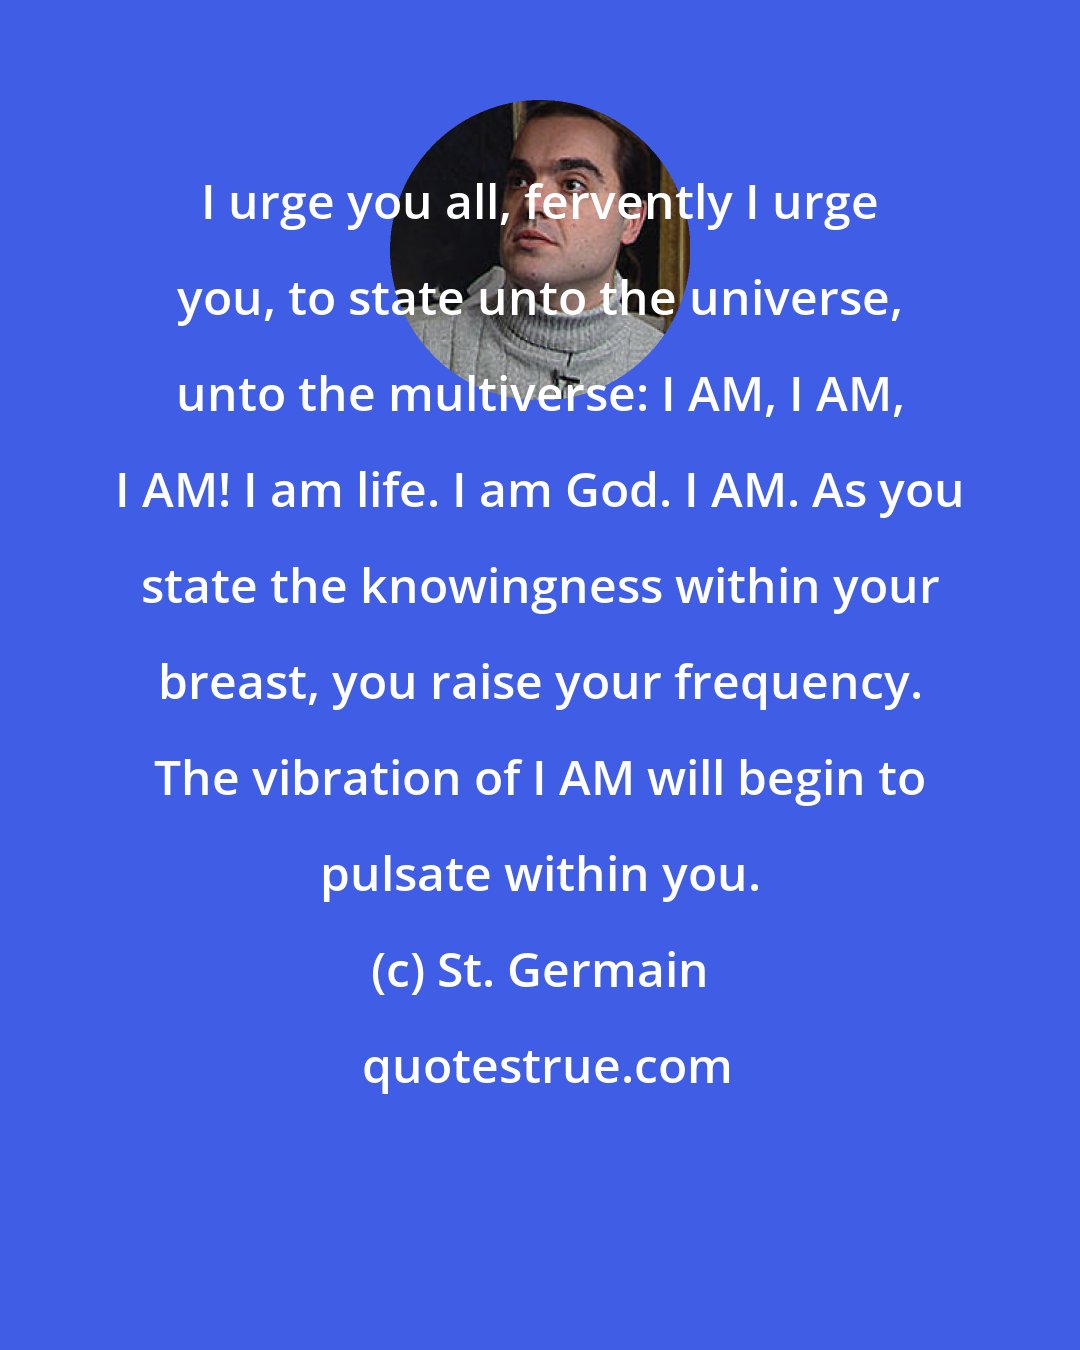 St. Germain: I urge you all, fervently I urge you, to state unto the universe, unto the multiverse: I AM, I AM, I AM! I am life. I am God. I AM. As you state the knowingness within your breast, you raise your frequency. The vibration of I AM will begin to pulsate within you.